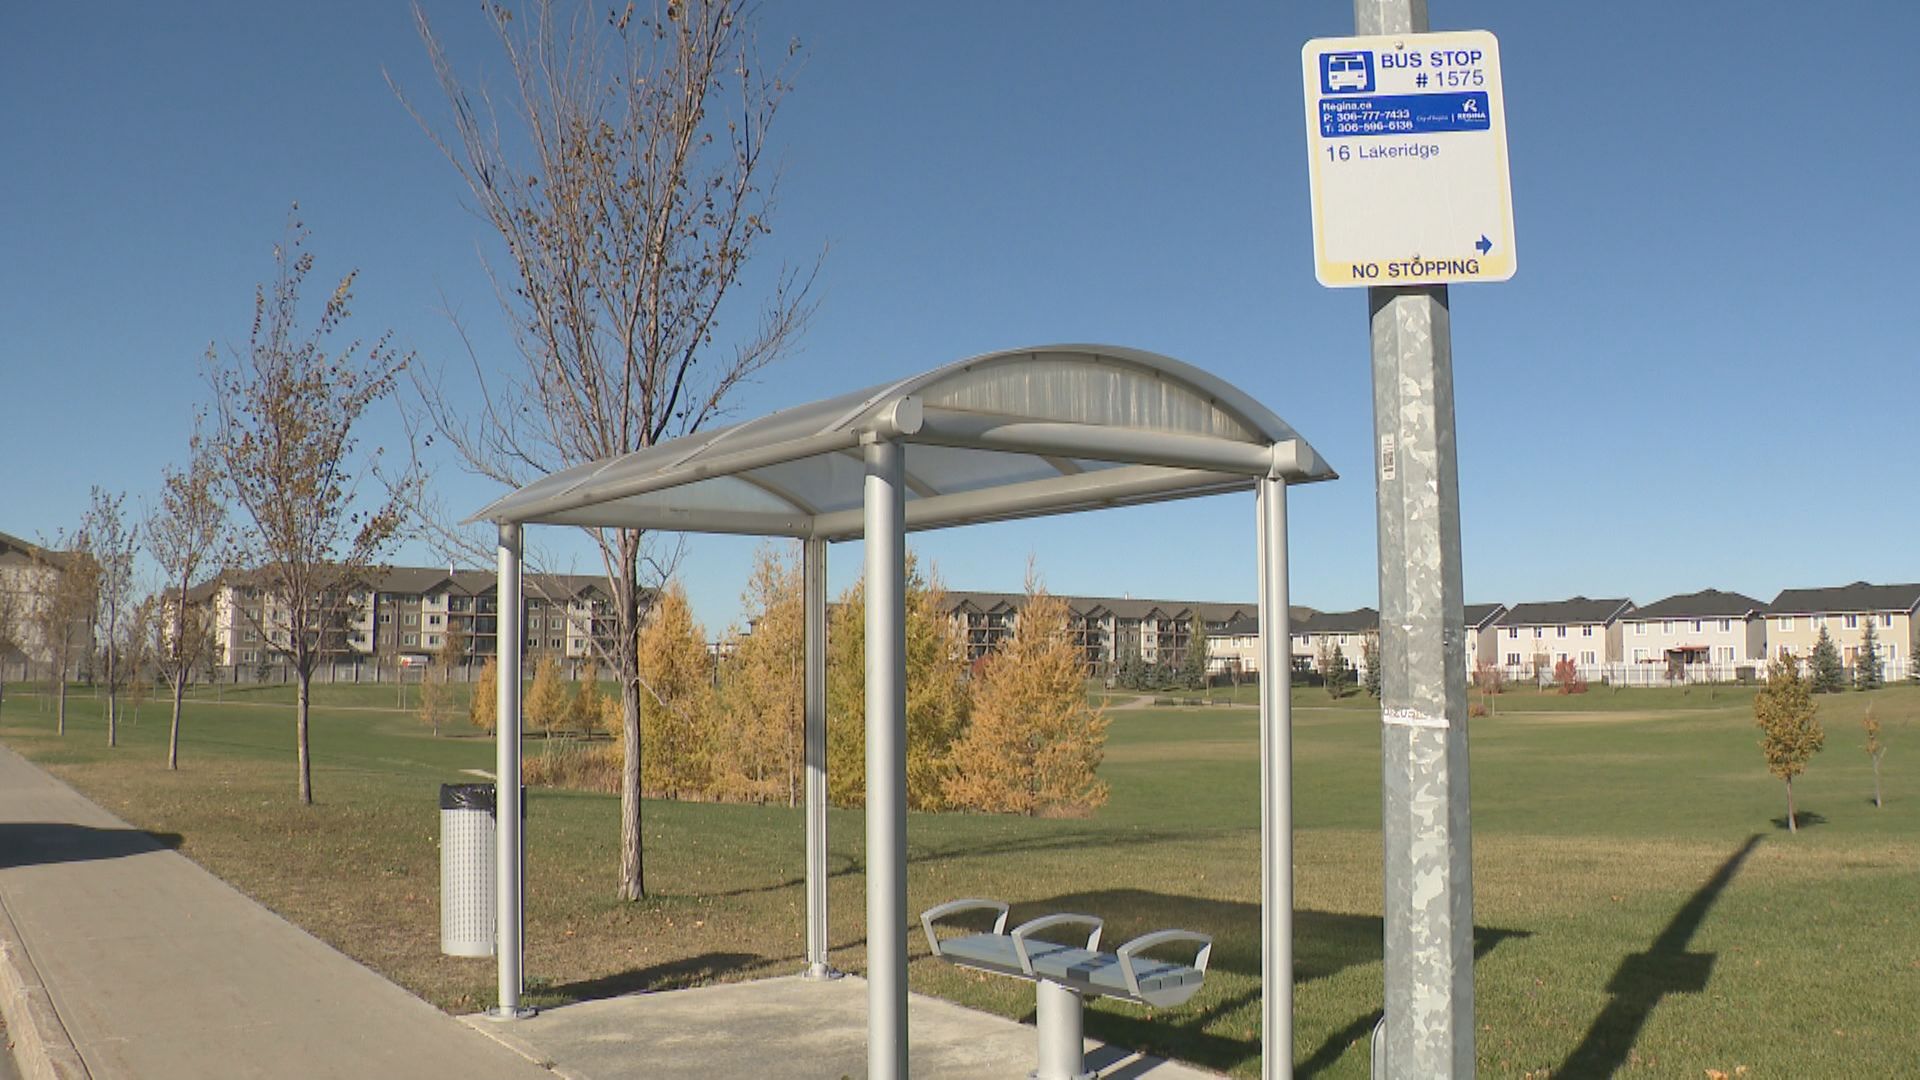 109 City of Regina bus shelters damaged this year